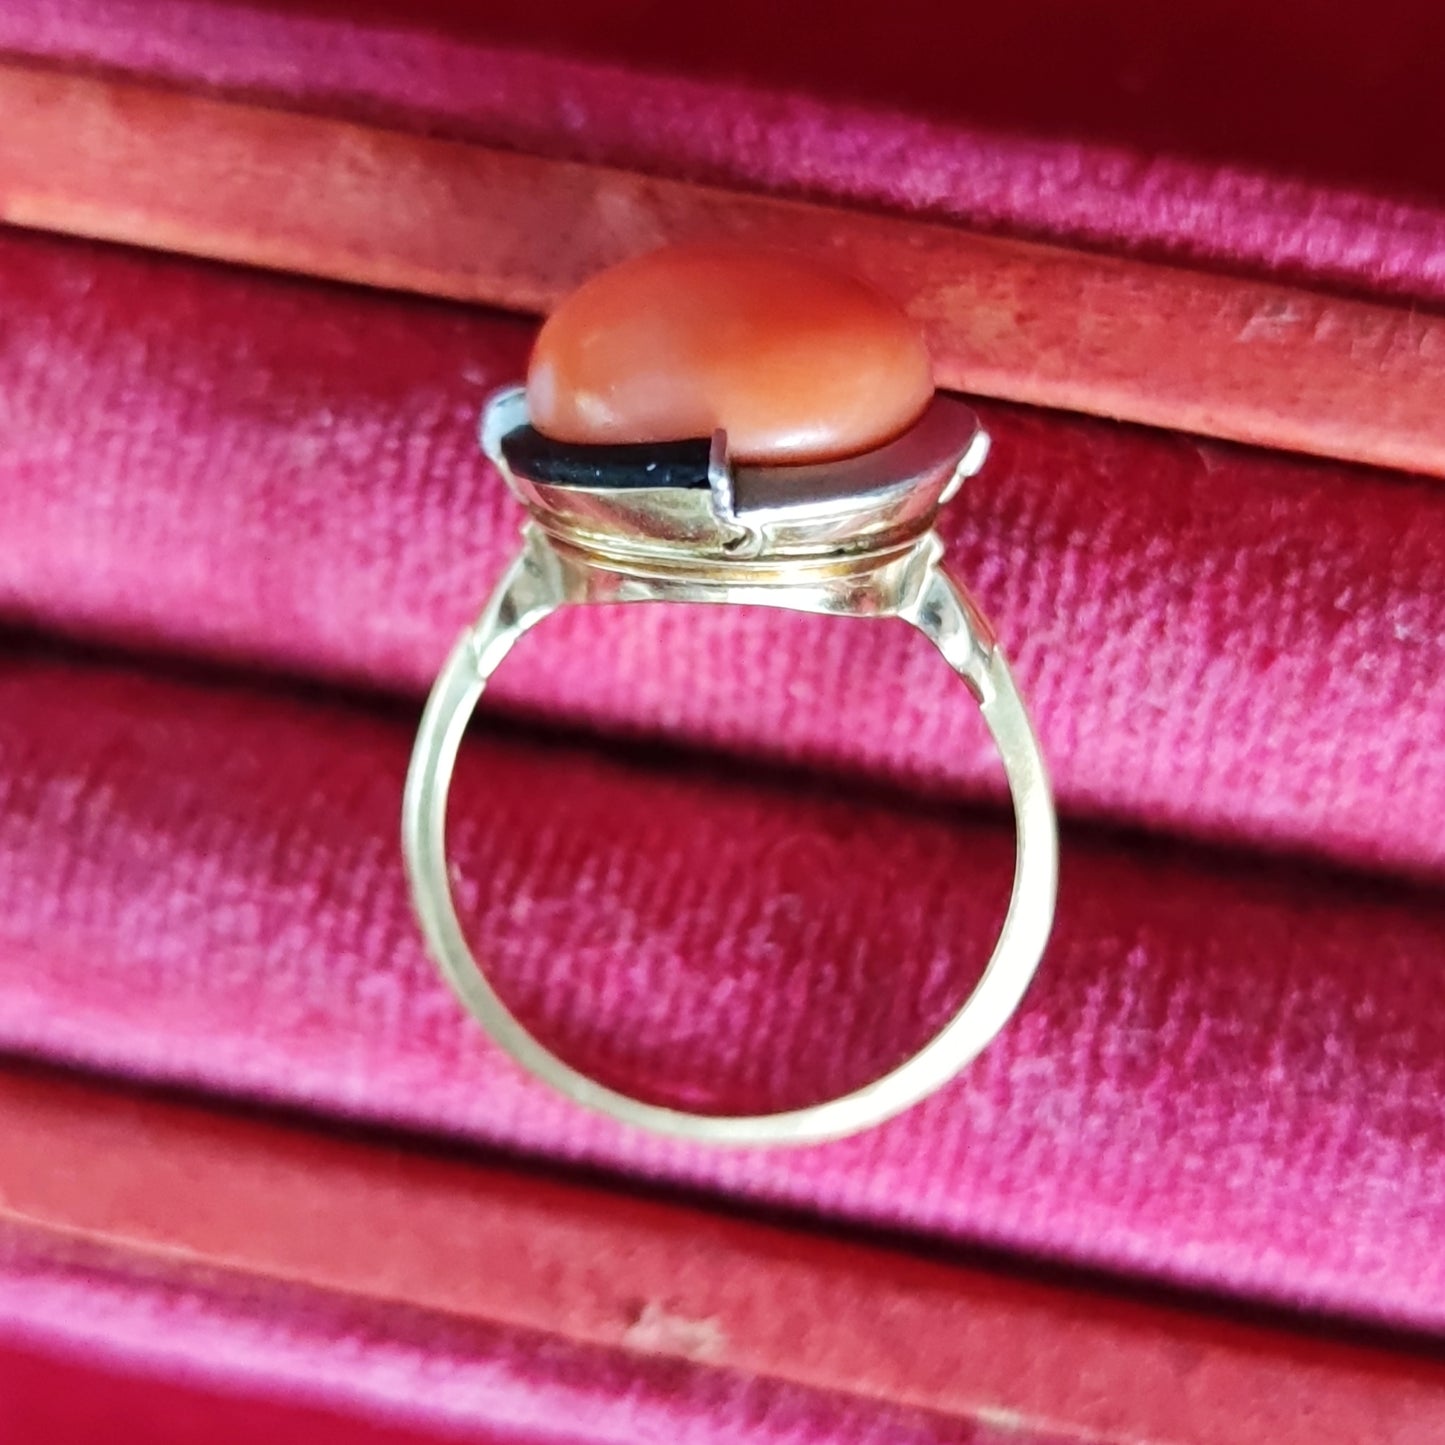 The coral Art Deco ring